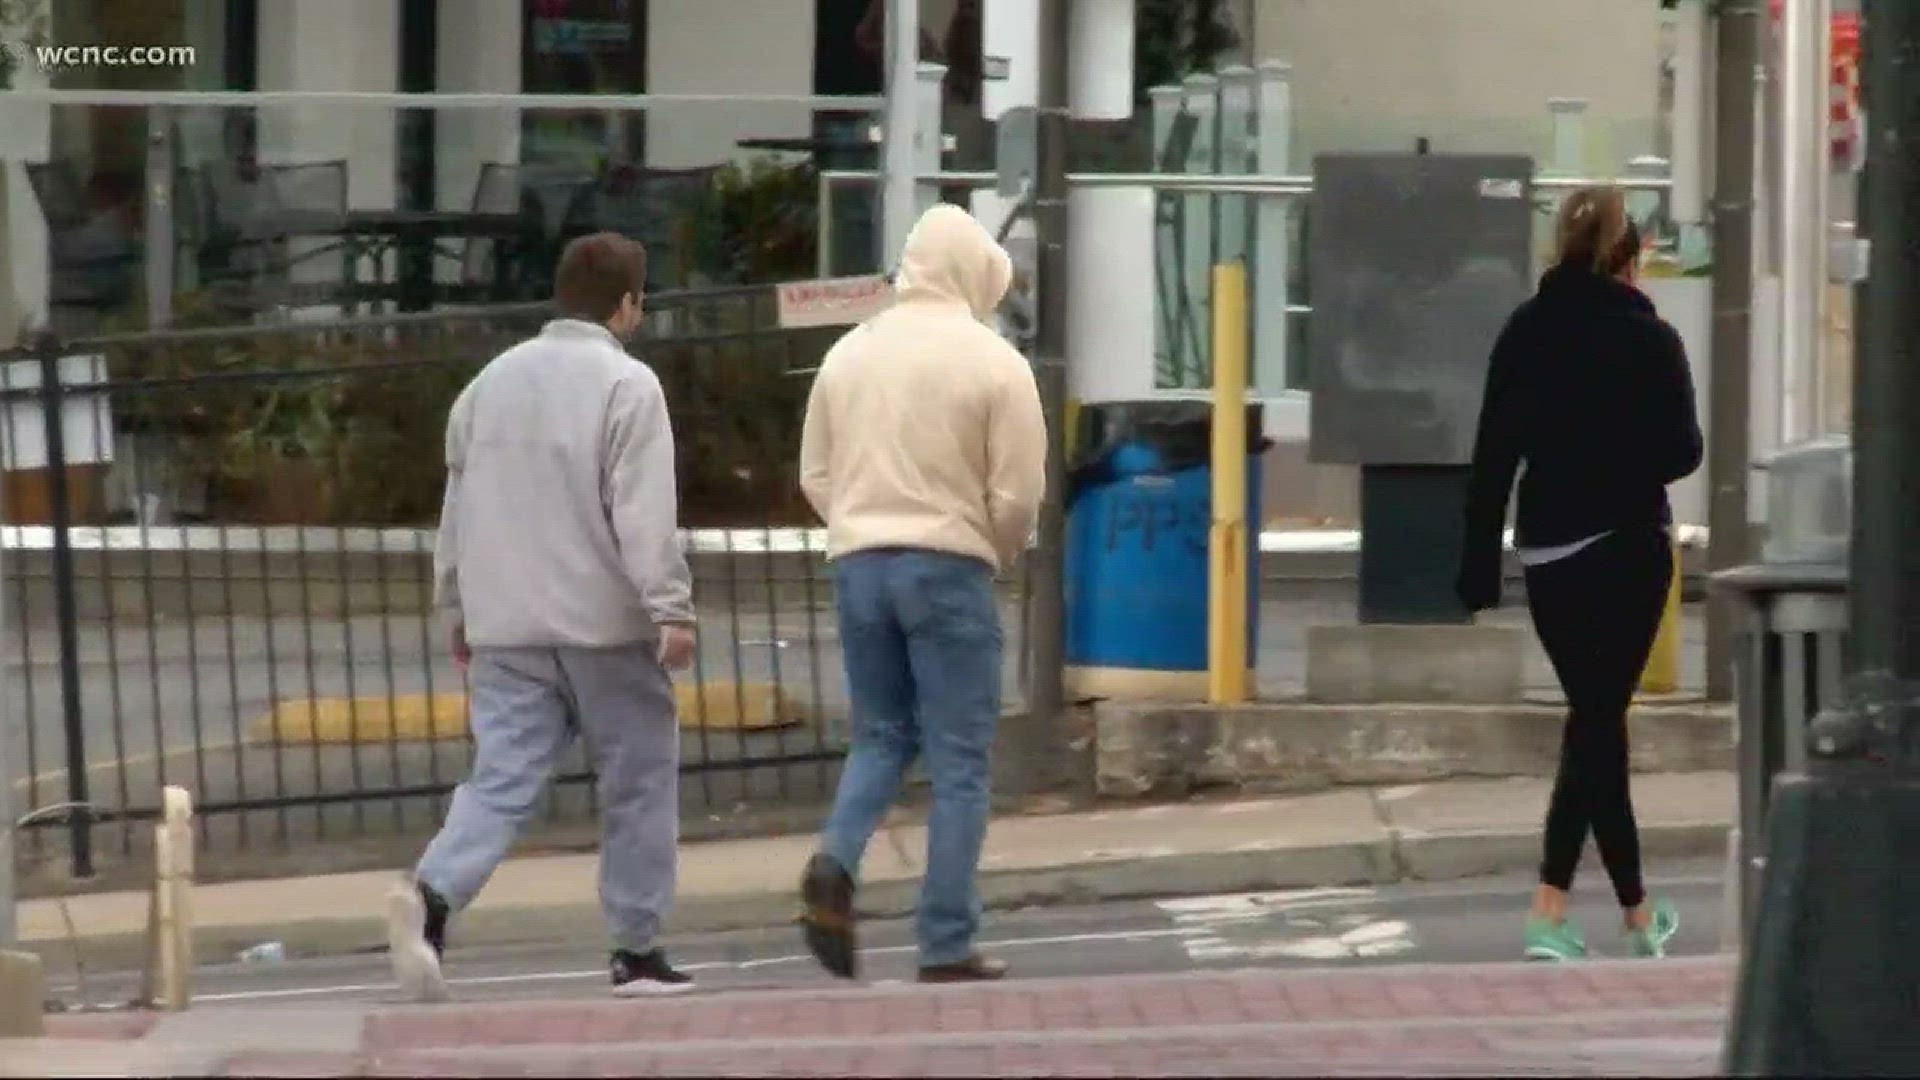 Folks in the Carolinas are doing whatever they can to stay warm during the recent cold snap.